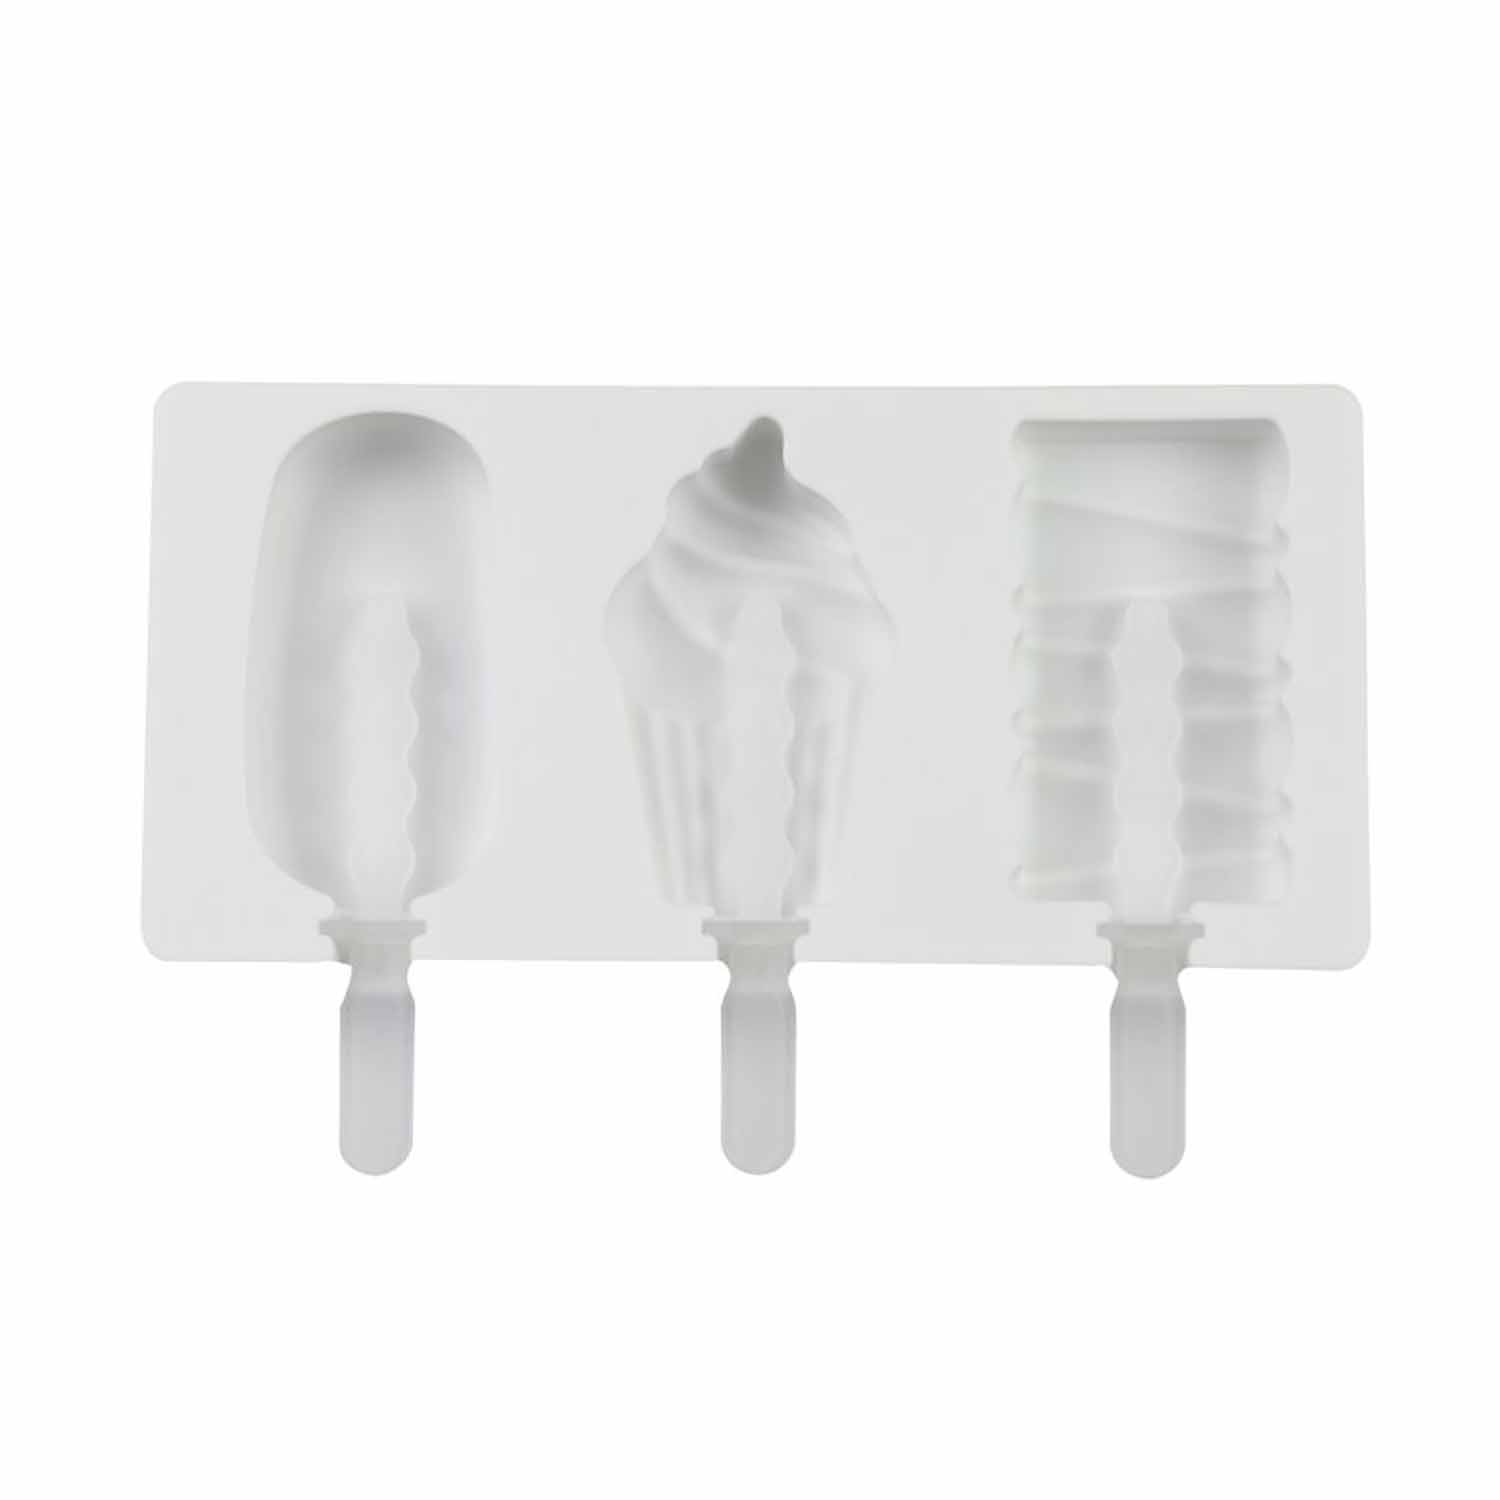 Flower Cakesicle Mold, Silicone Flower Cake Pop Molds